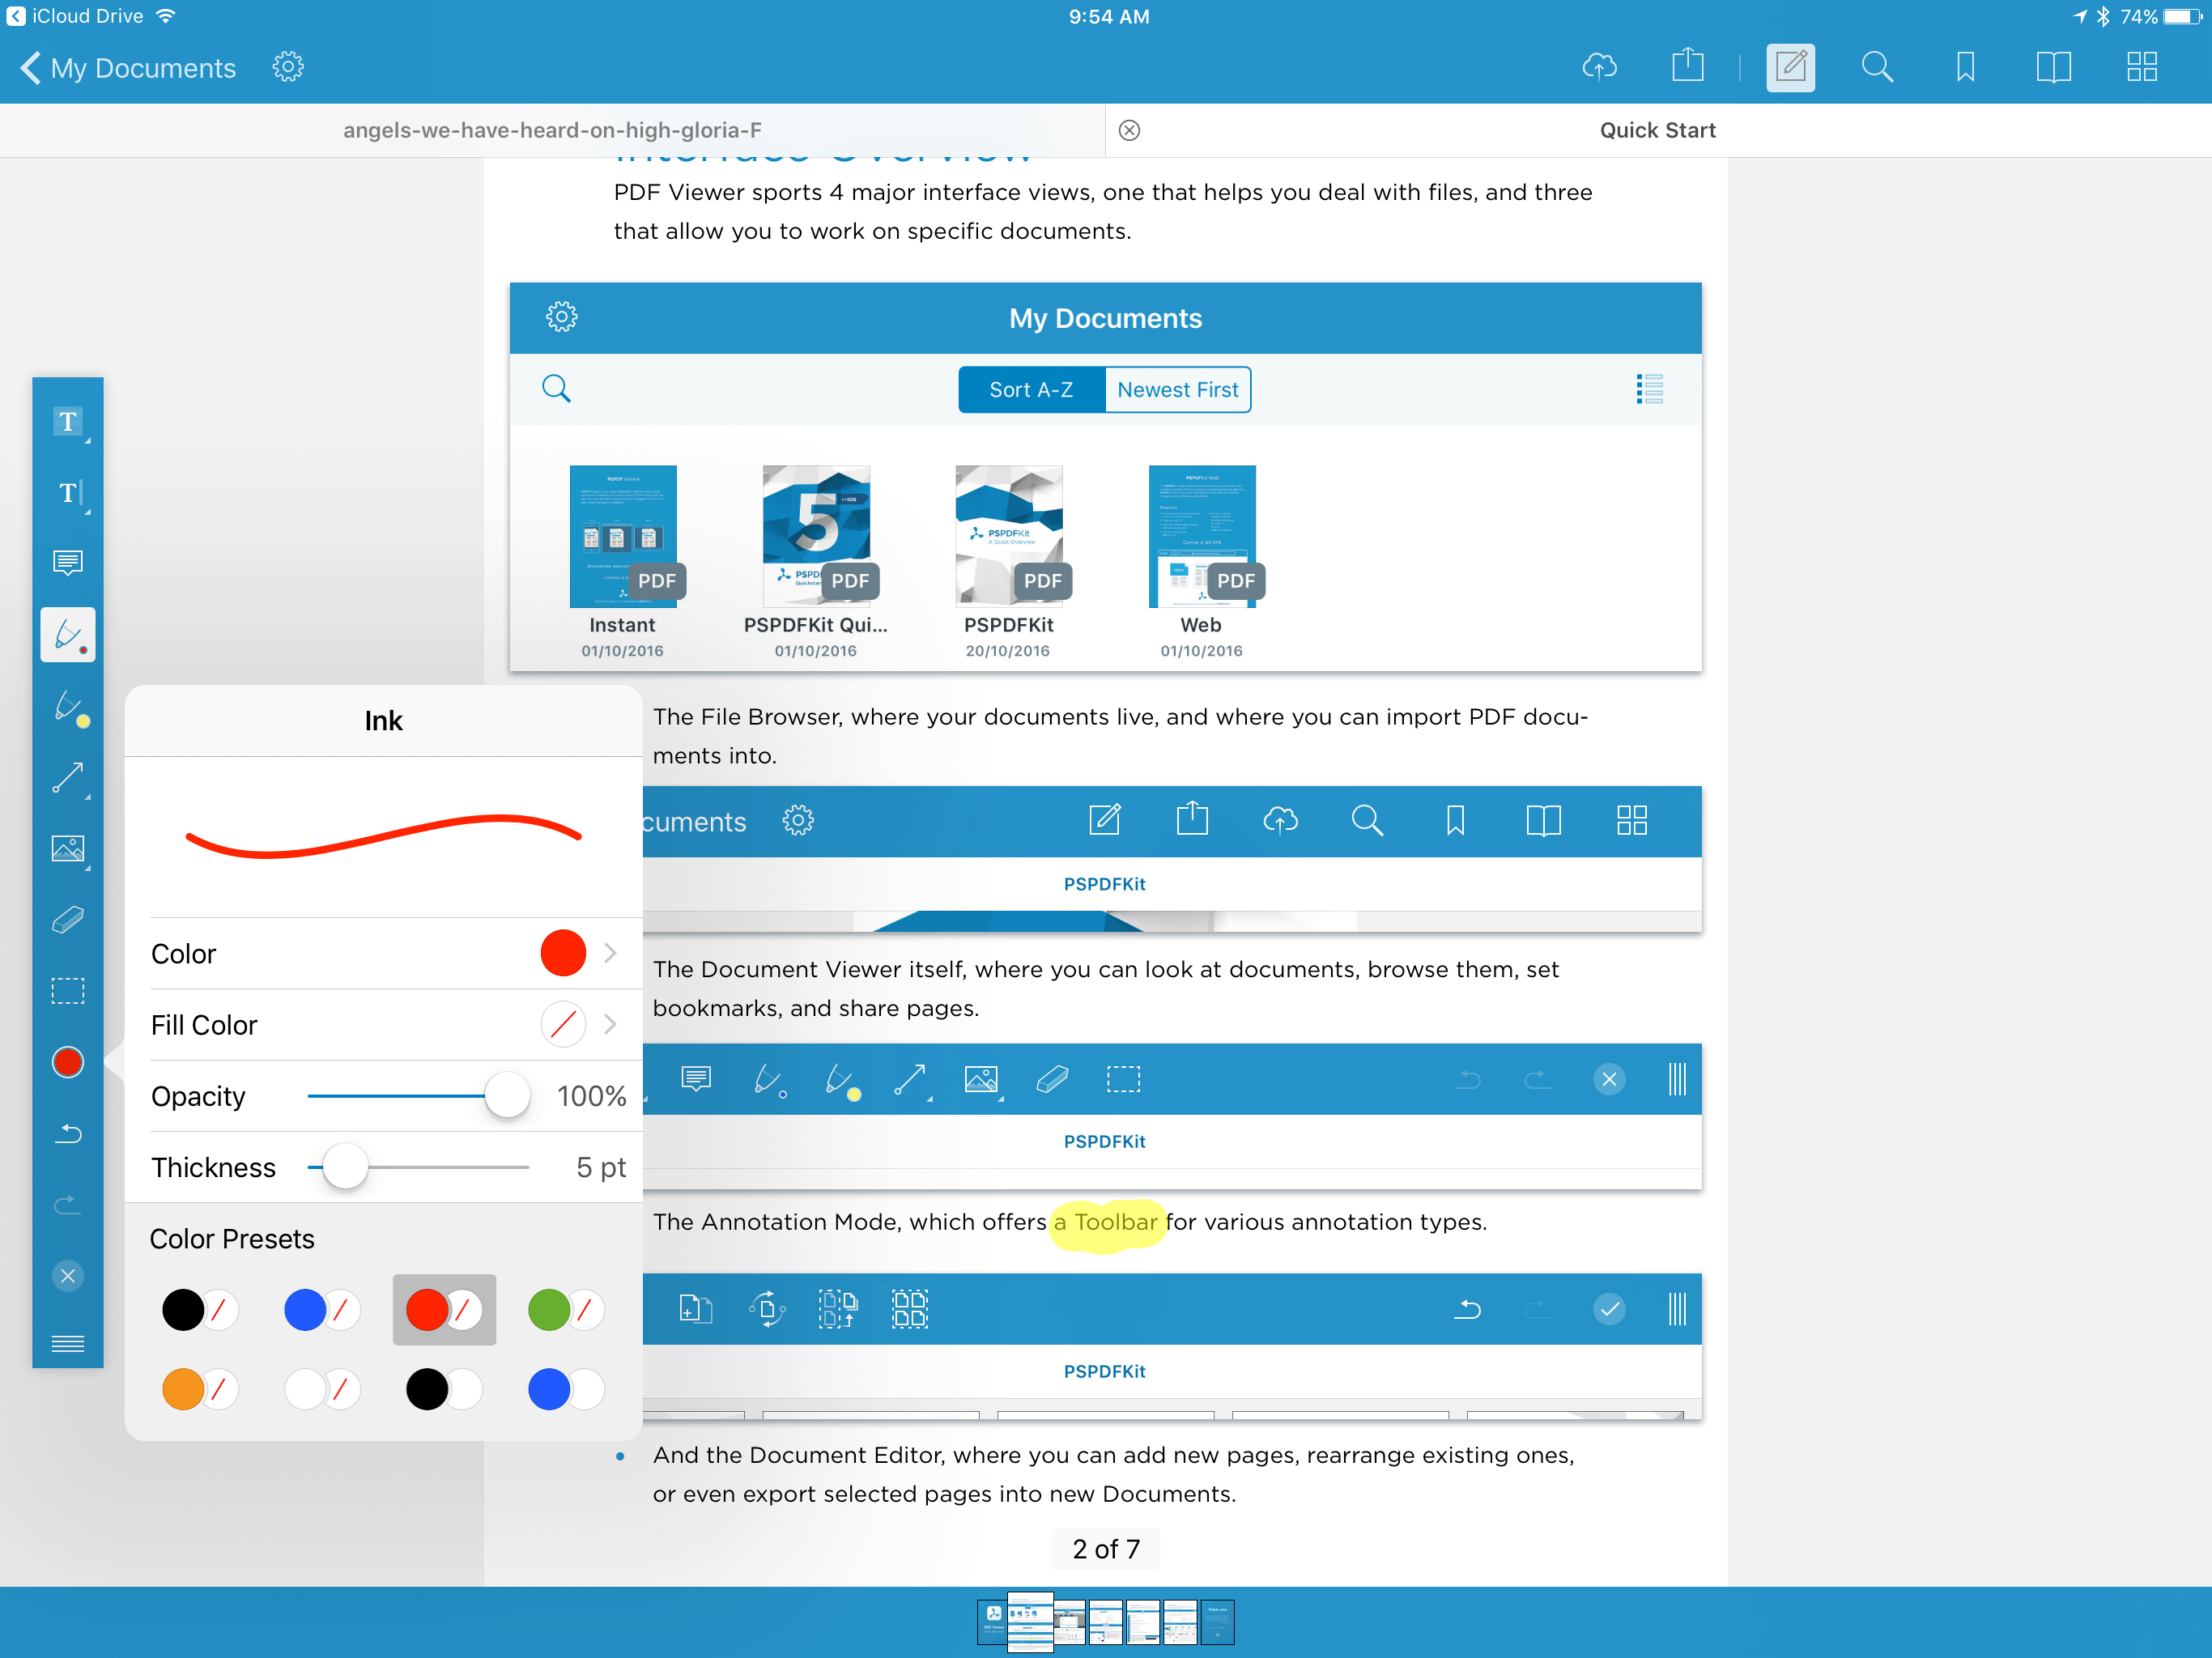 PDF Viewer includes a number of useful annotation options